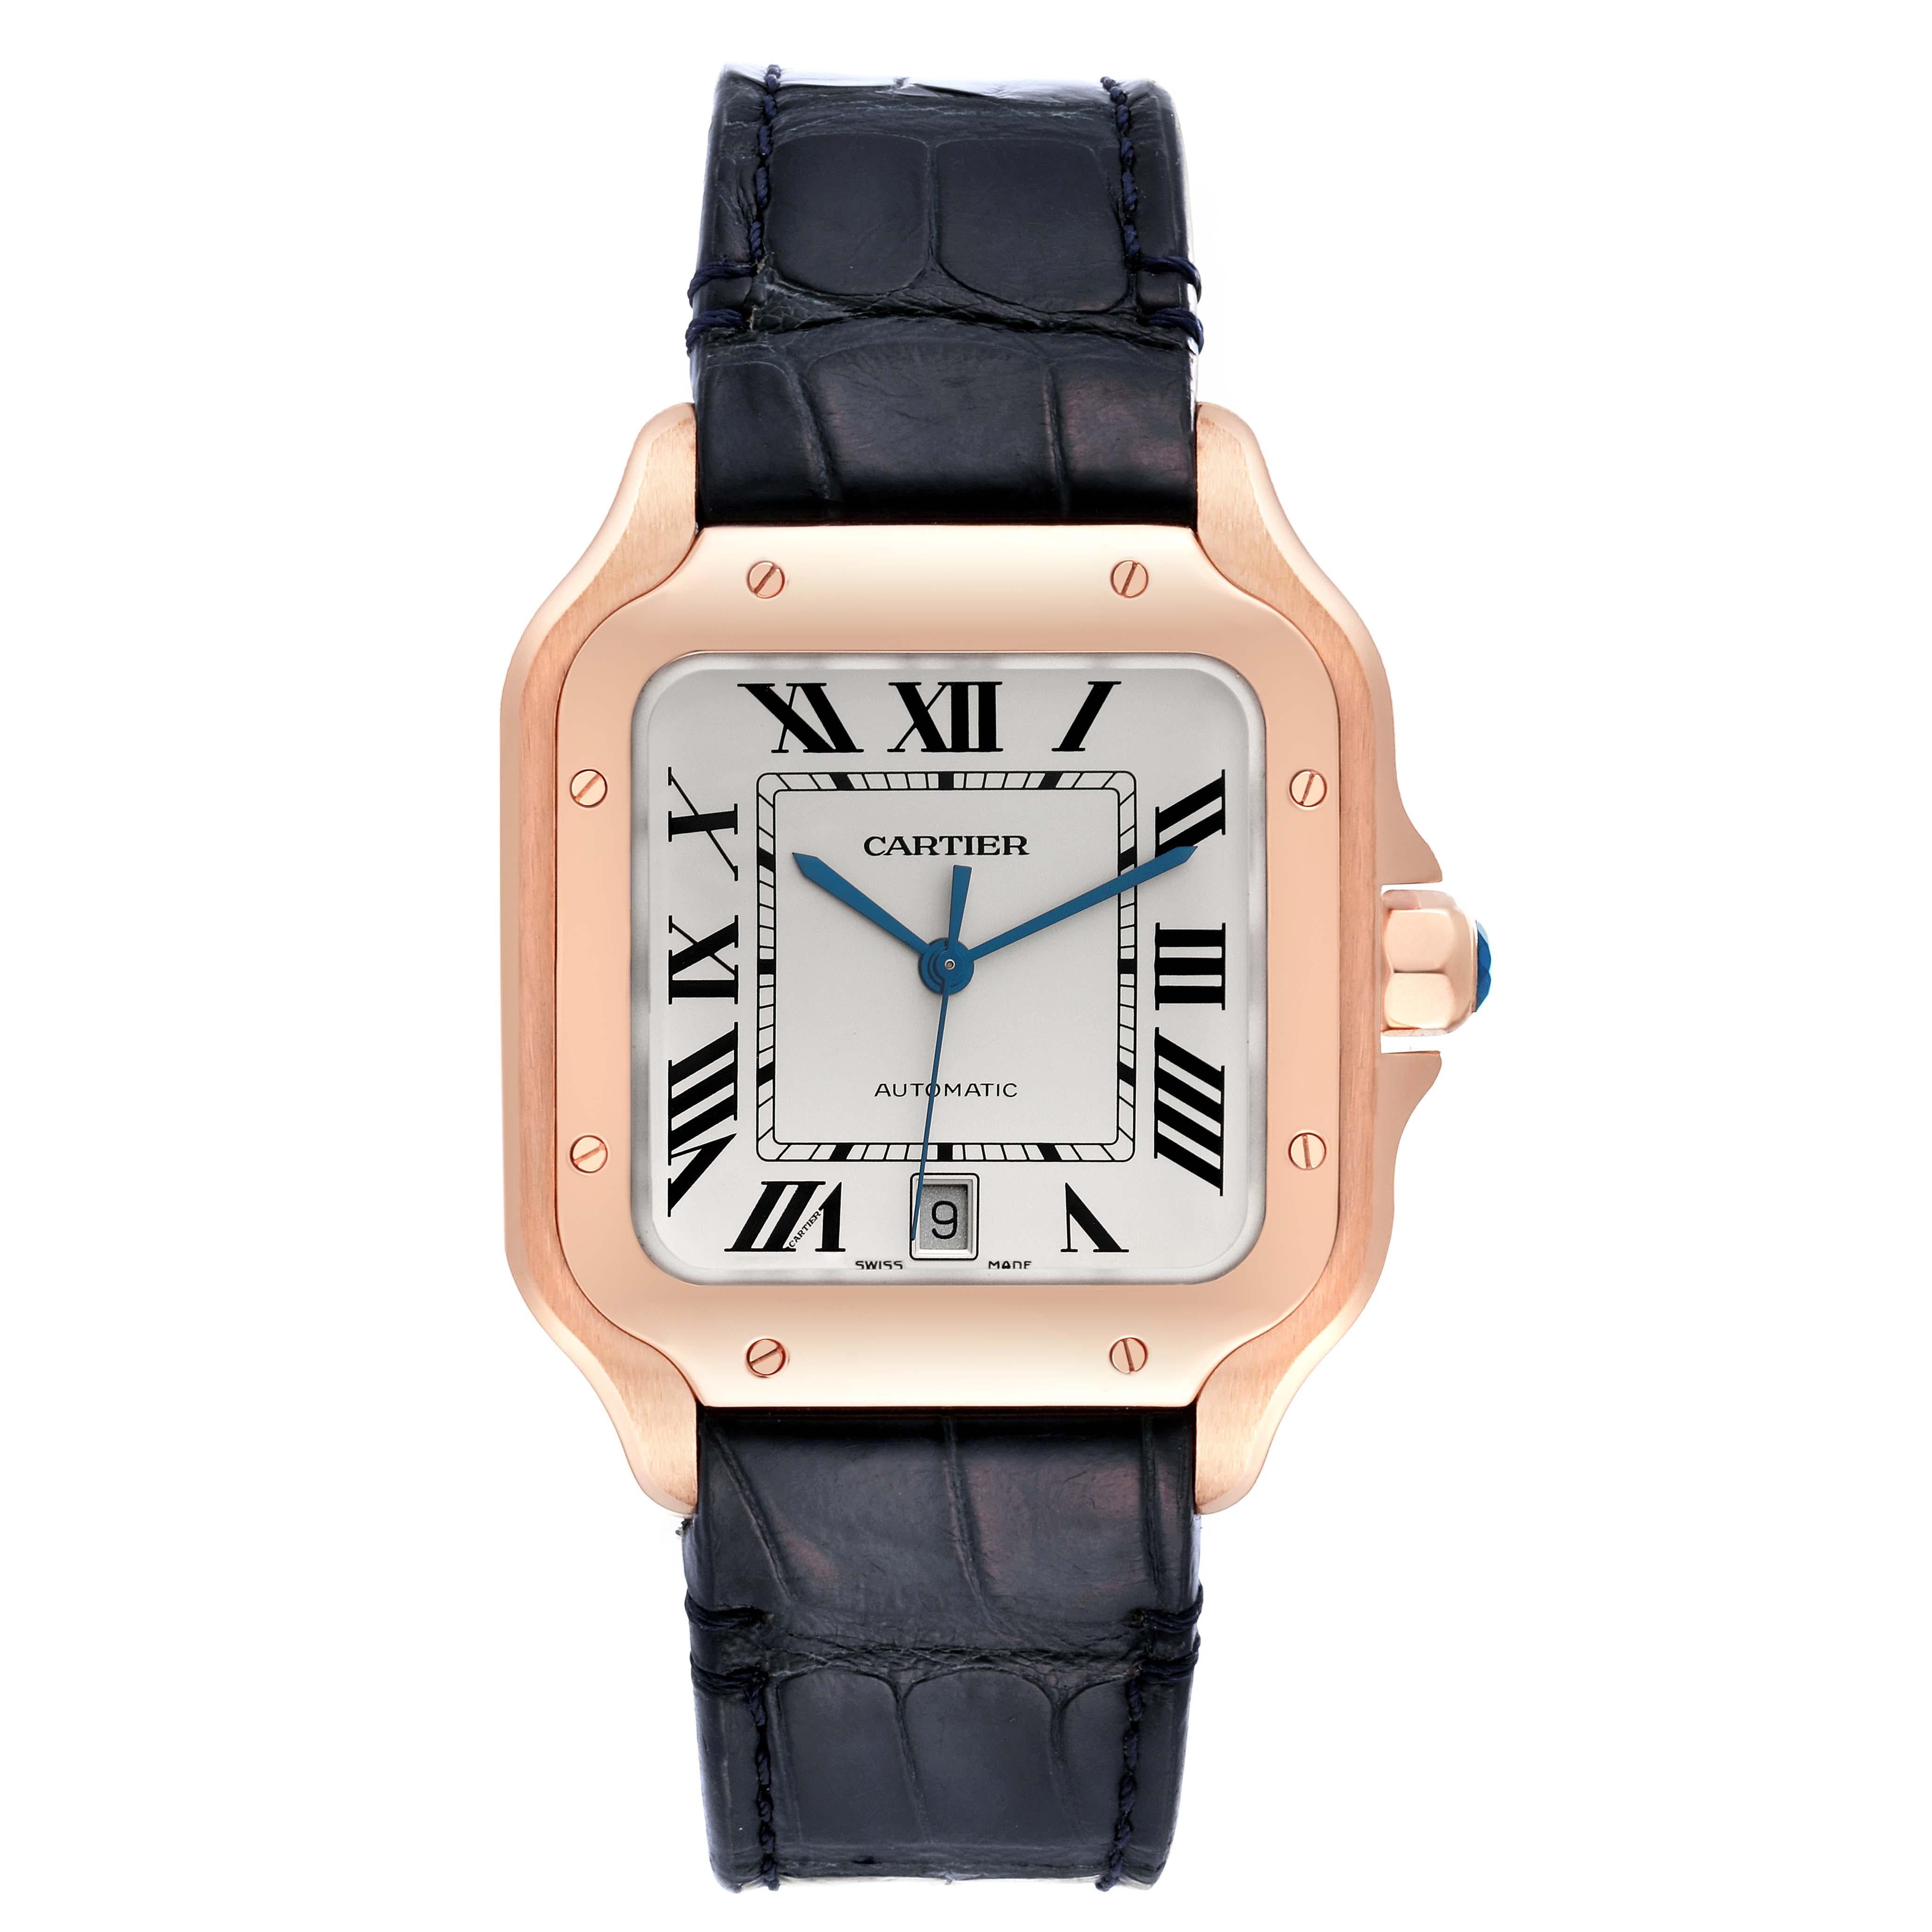 Cartier Santos Large Rose Gold Blue Strap Mens Watch WGSA0019 Box Card. Automatic self-winding movement. 18K rose gold case 47.5 x 38 mm.  Octagonal crown set with a faceted blue sapphire. 18K rose gold bezel punctuated with 8 signature screws.